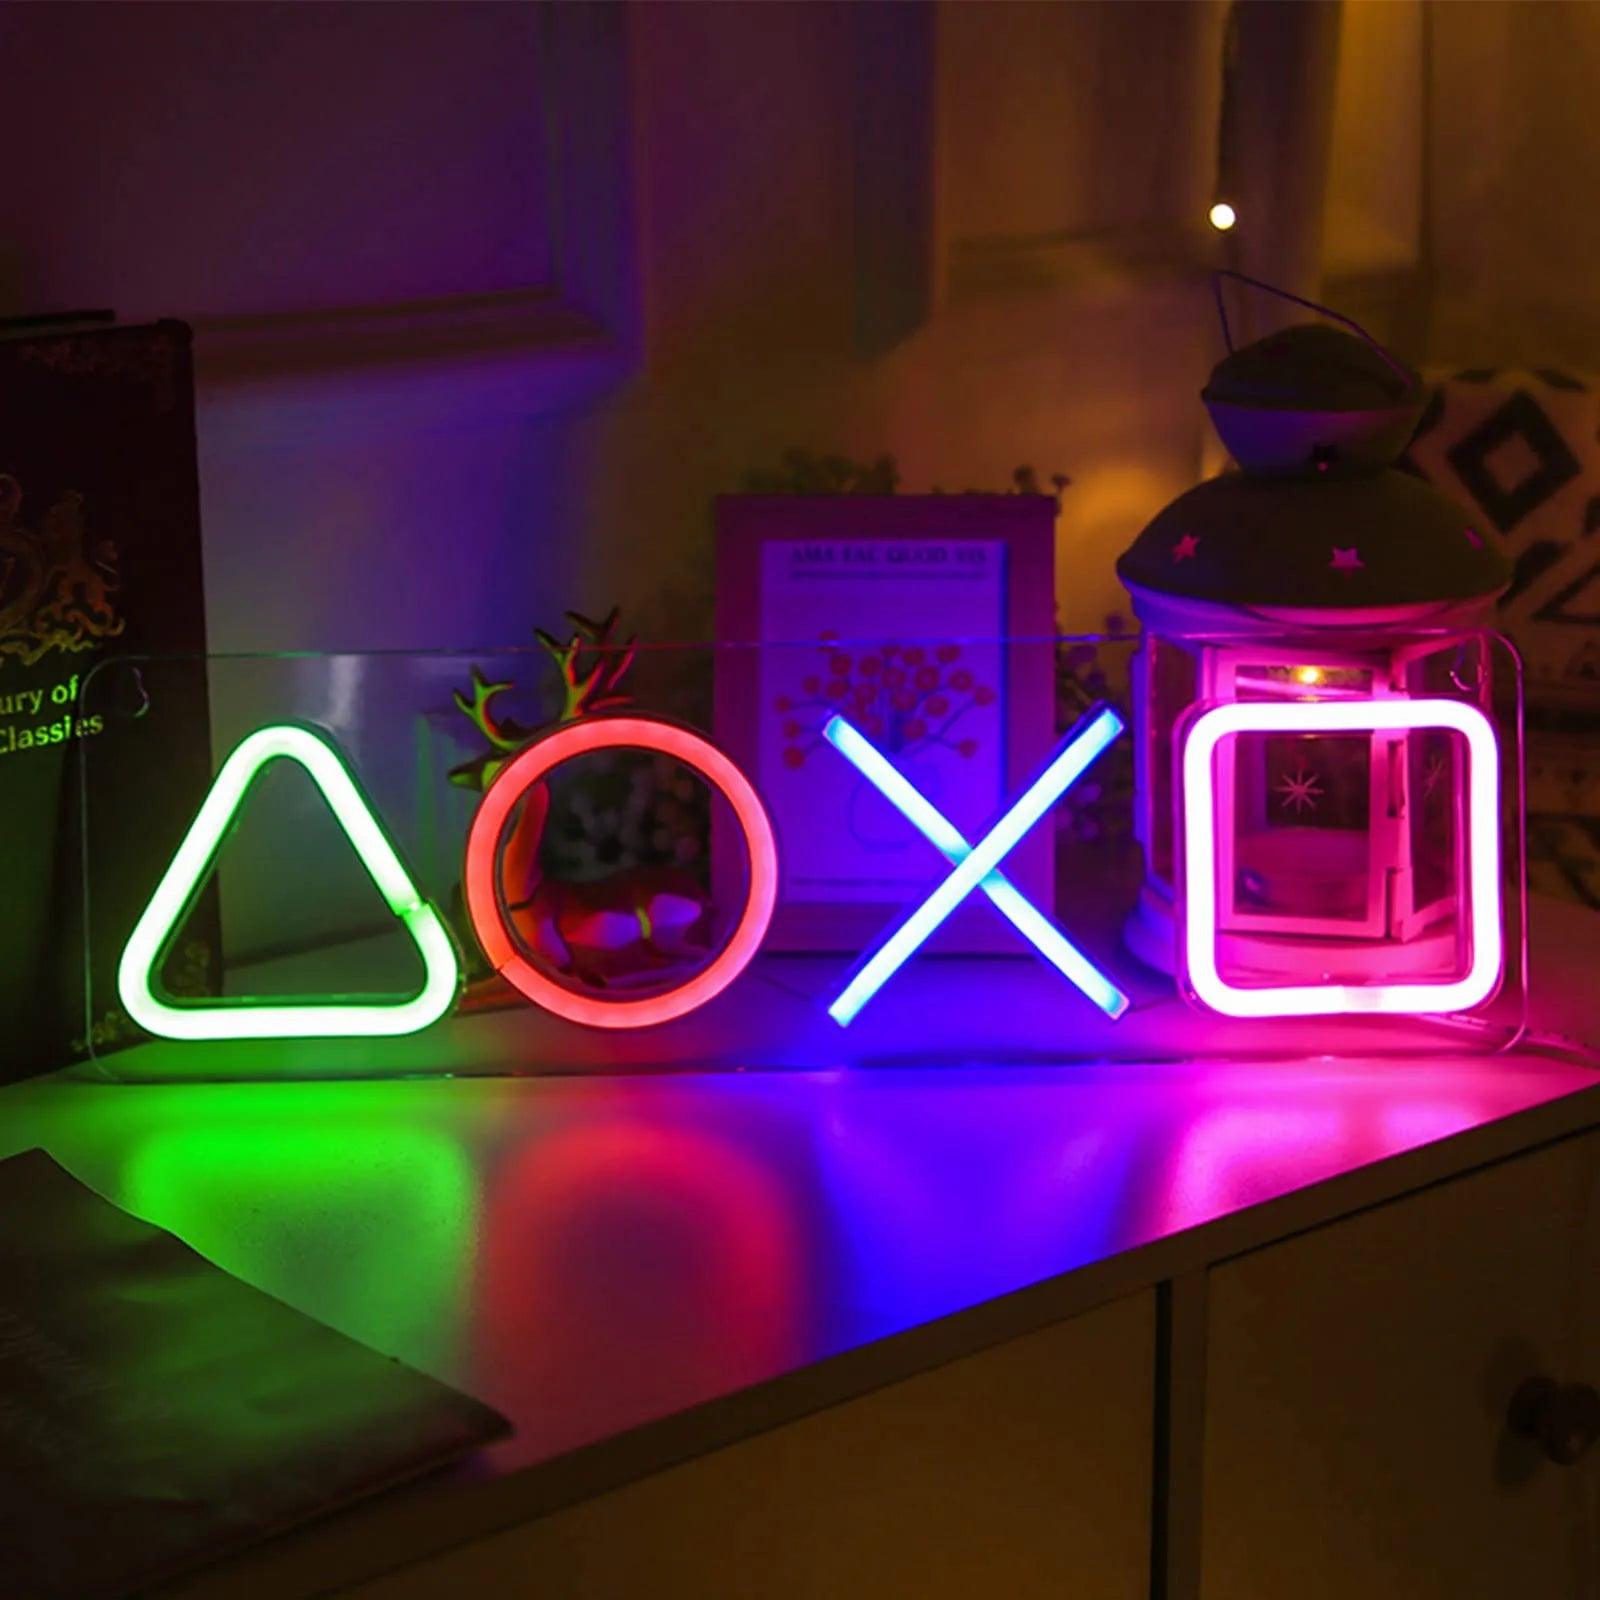 Custom PS4 Game Icon Neon Sign Light - Personalized LED Wall Hanging Atmosphere Lamp for Colorful Room Decor  ourlum.com   